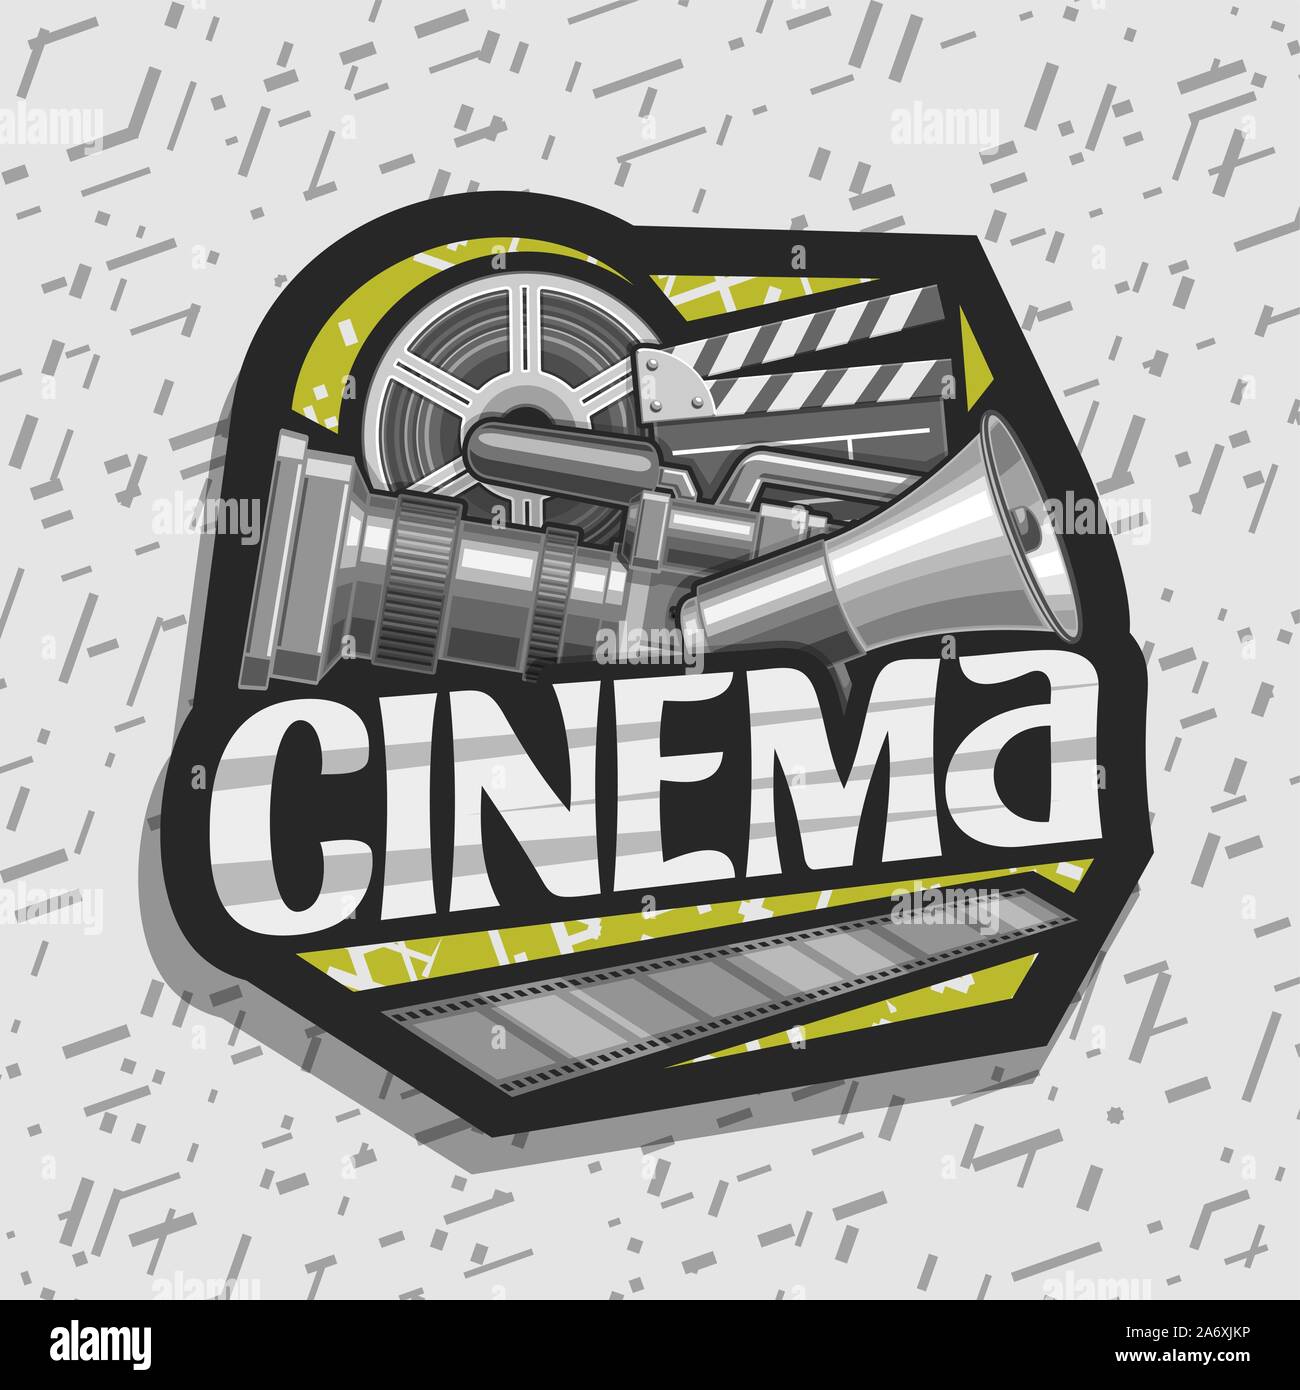 Vector logo for Cinema, black decorative tag with professional film equipment and speaking trumpet, original lettering for word cinema, illustration o Stock Vector